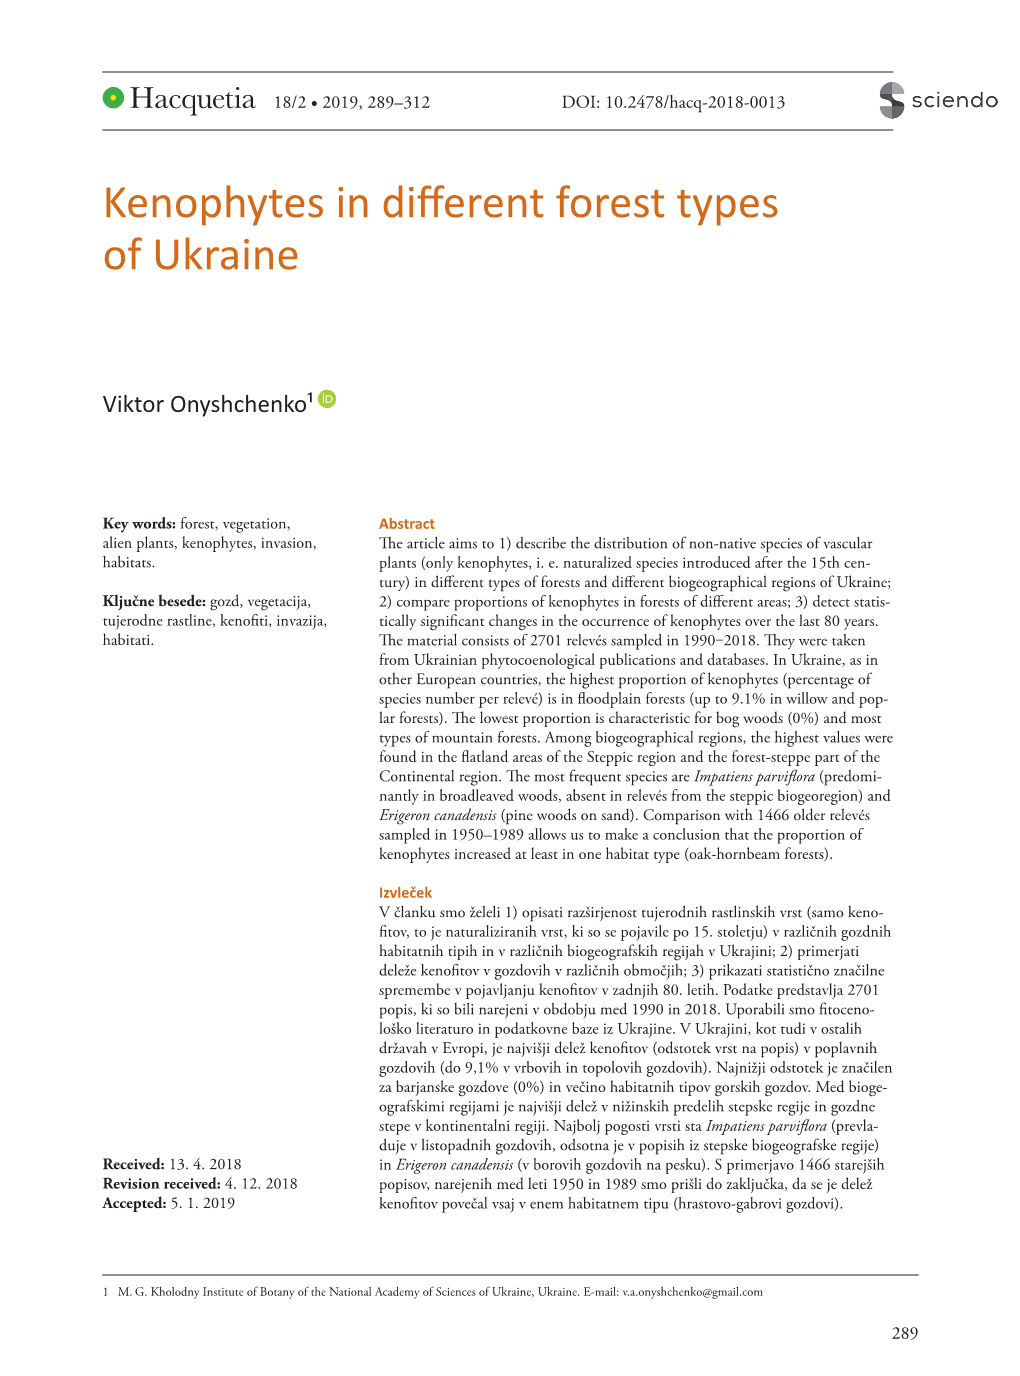 Kenophytes in Different Forest Types of Ukraine